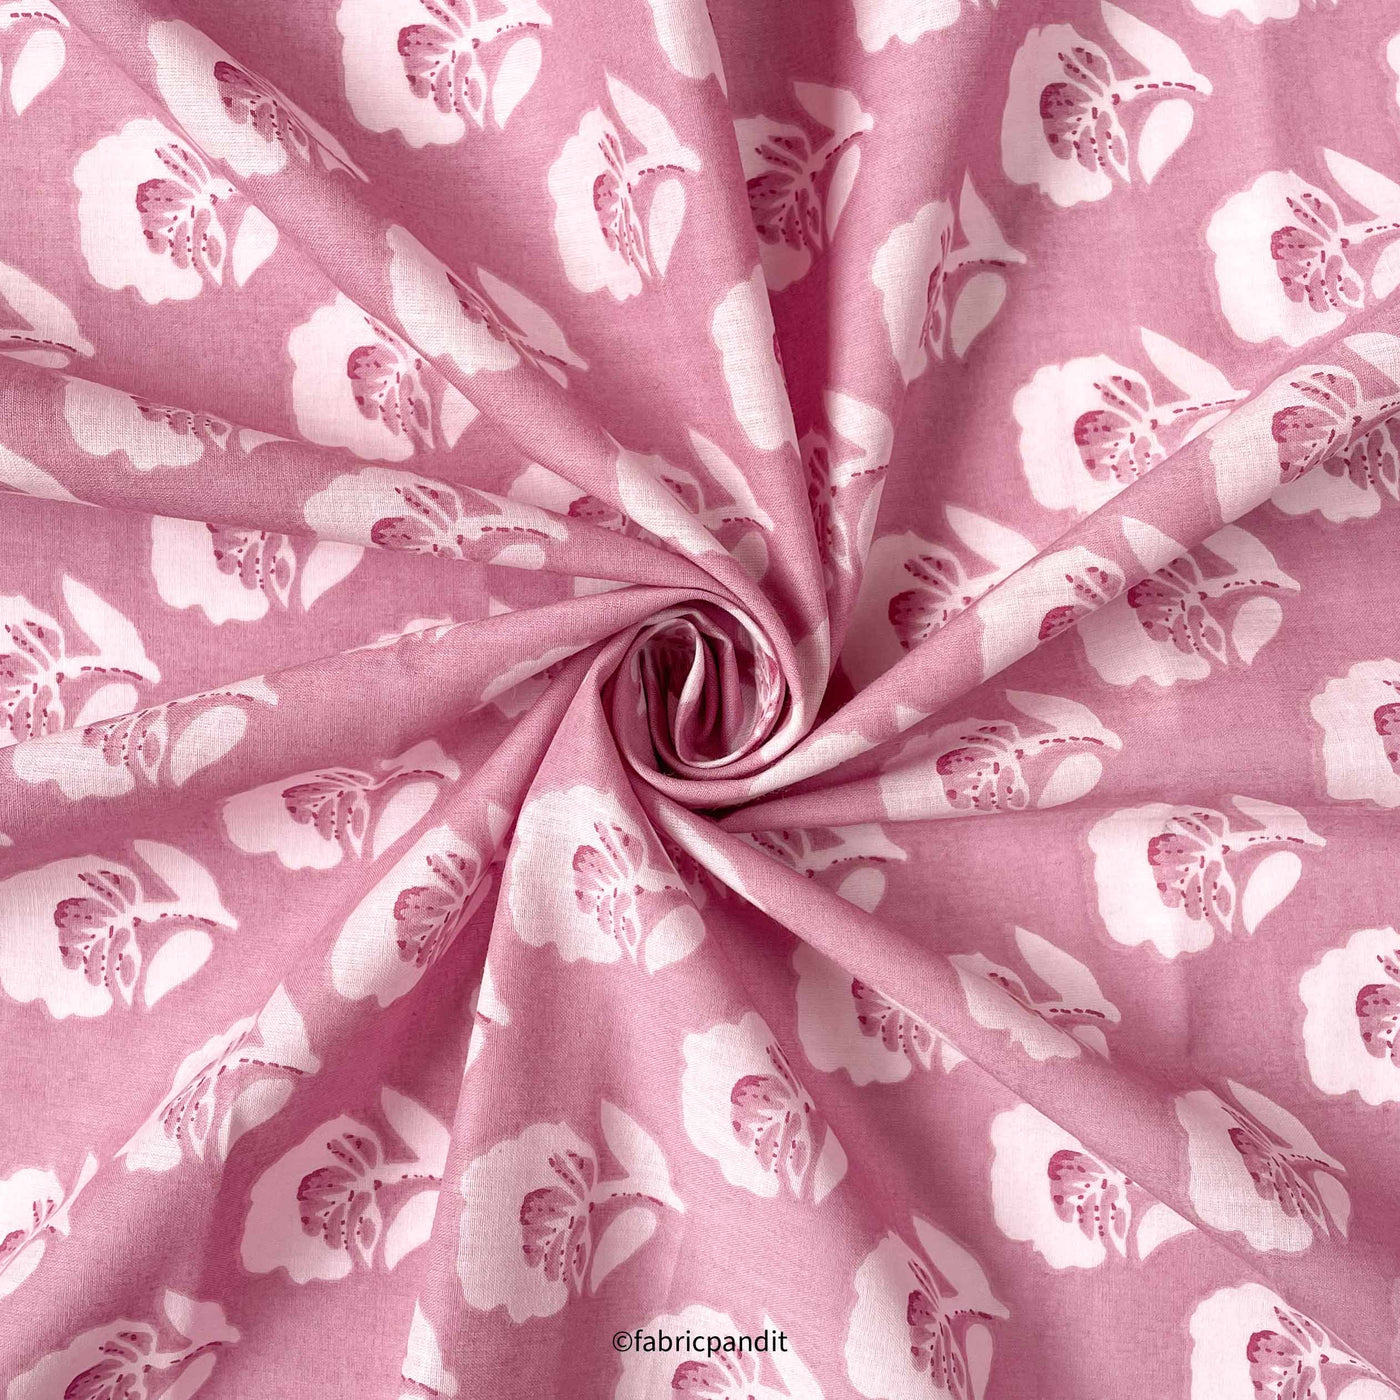 Fabric Pandit Fabric Blush Pink & Off-White Poppy Garden Hand Block Printed Pure Cotton Modal Fabric (Width 42 inches)